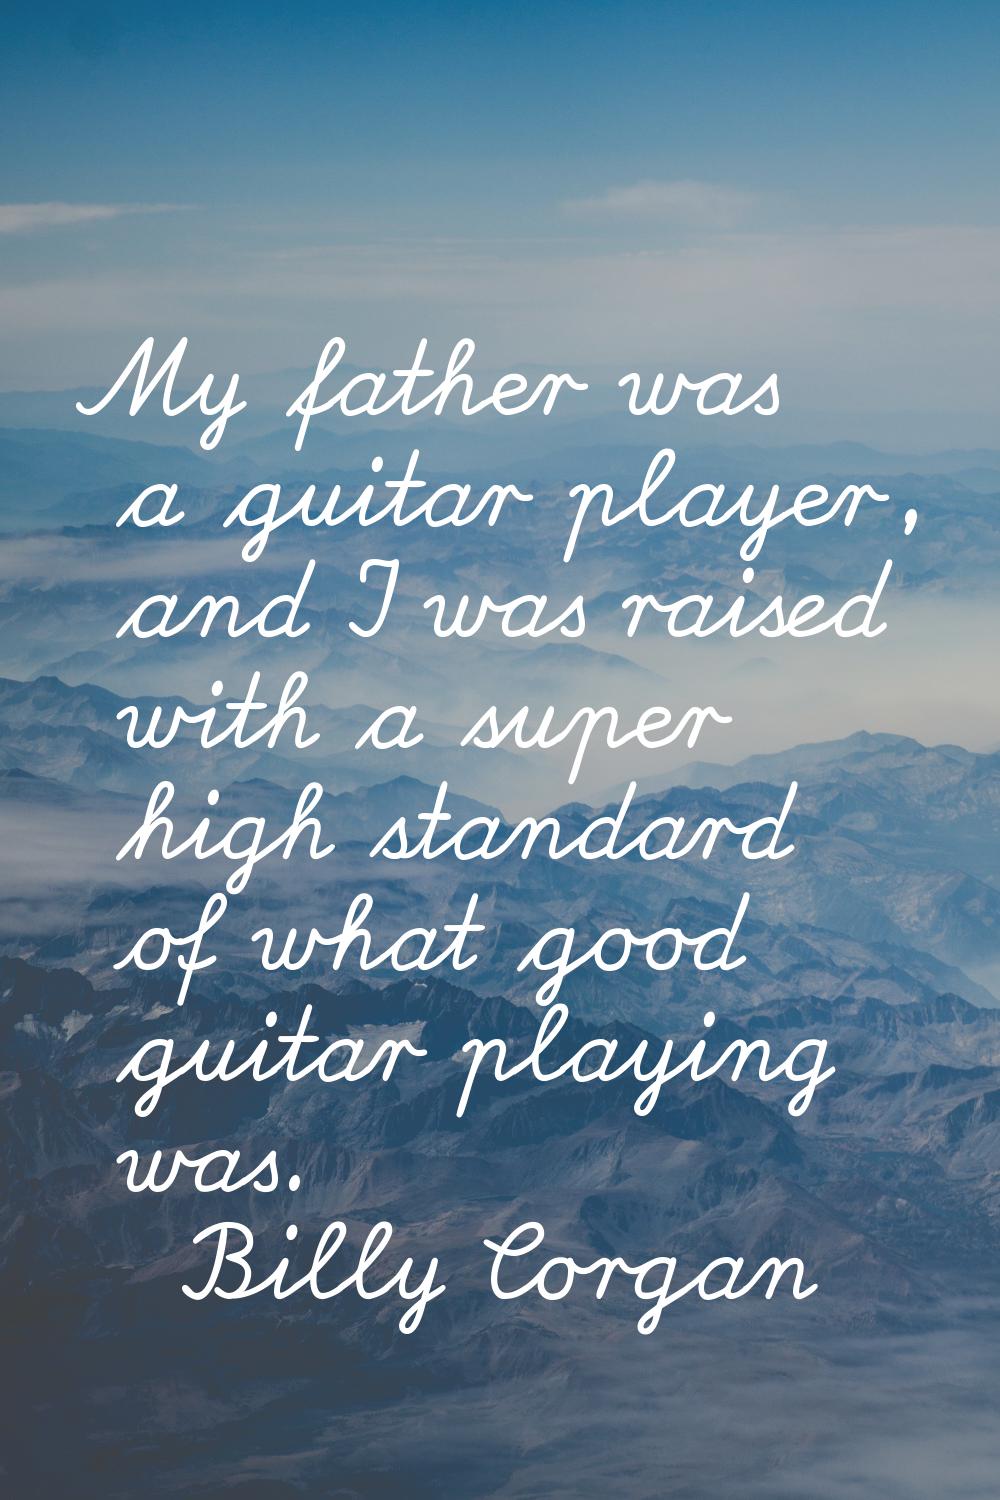 My father was a guitar player, and I was raised with a super high standard of what good guitar play